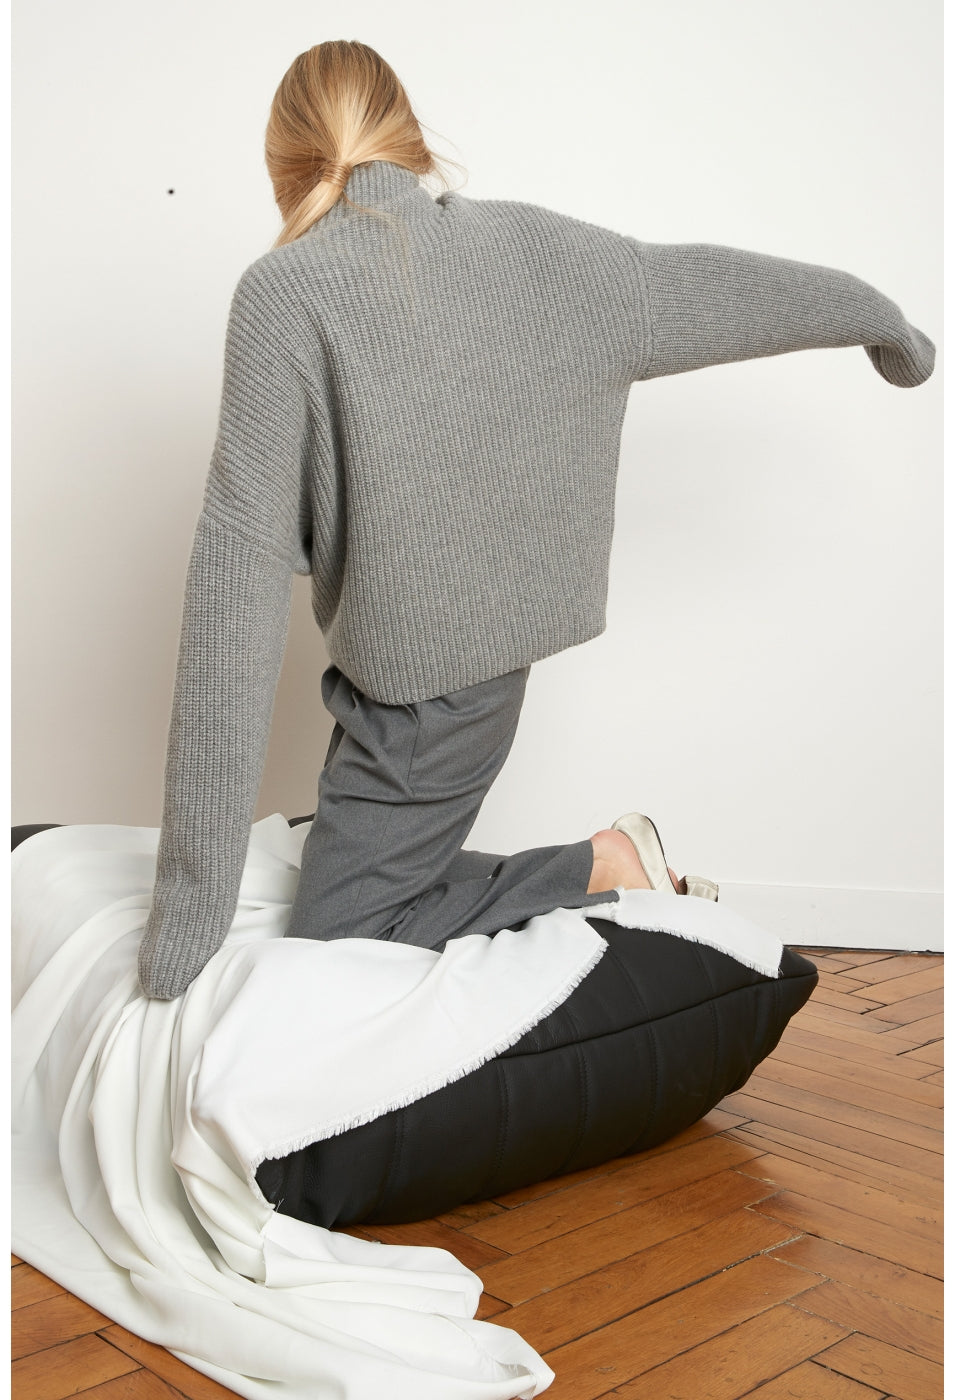 ROSCANA CASHMERE SWEATER BY LOULOU STUDIO IN GREY